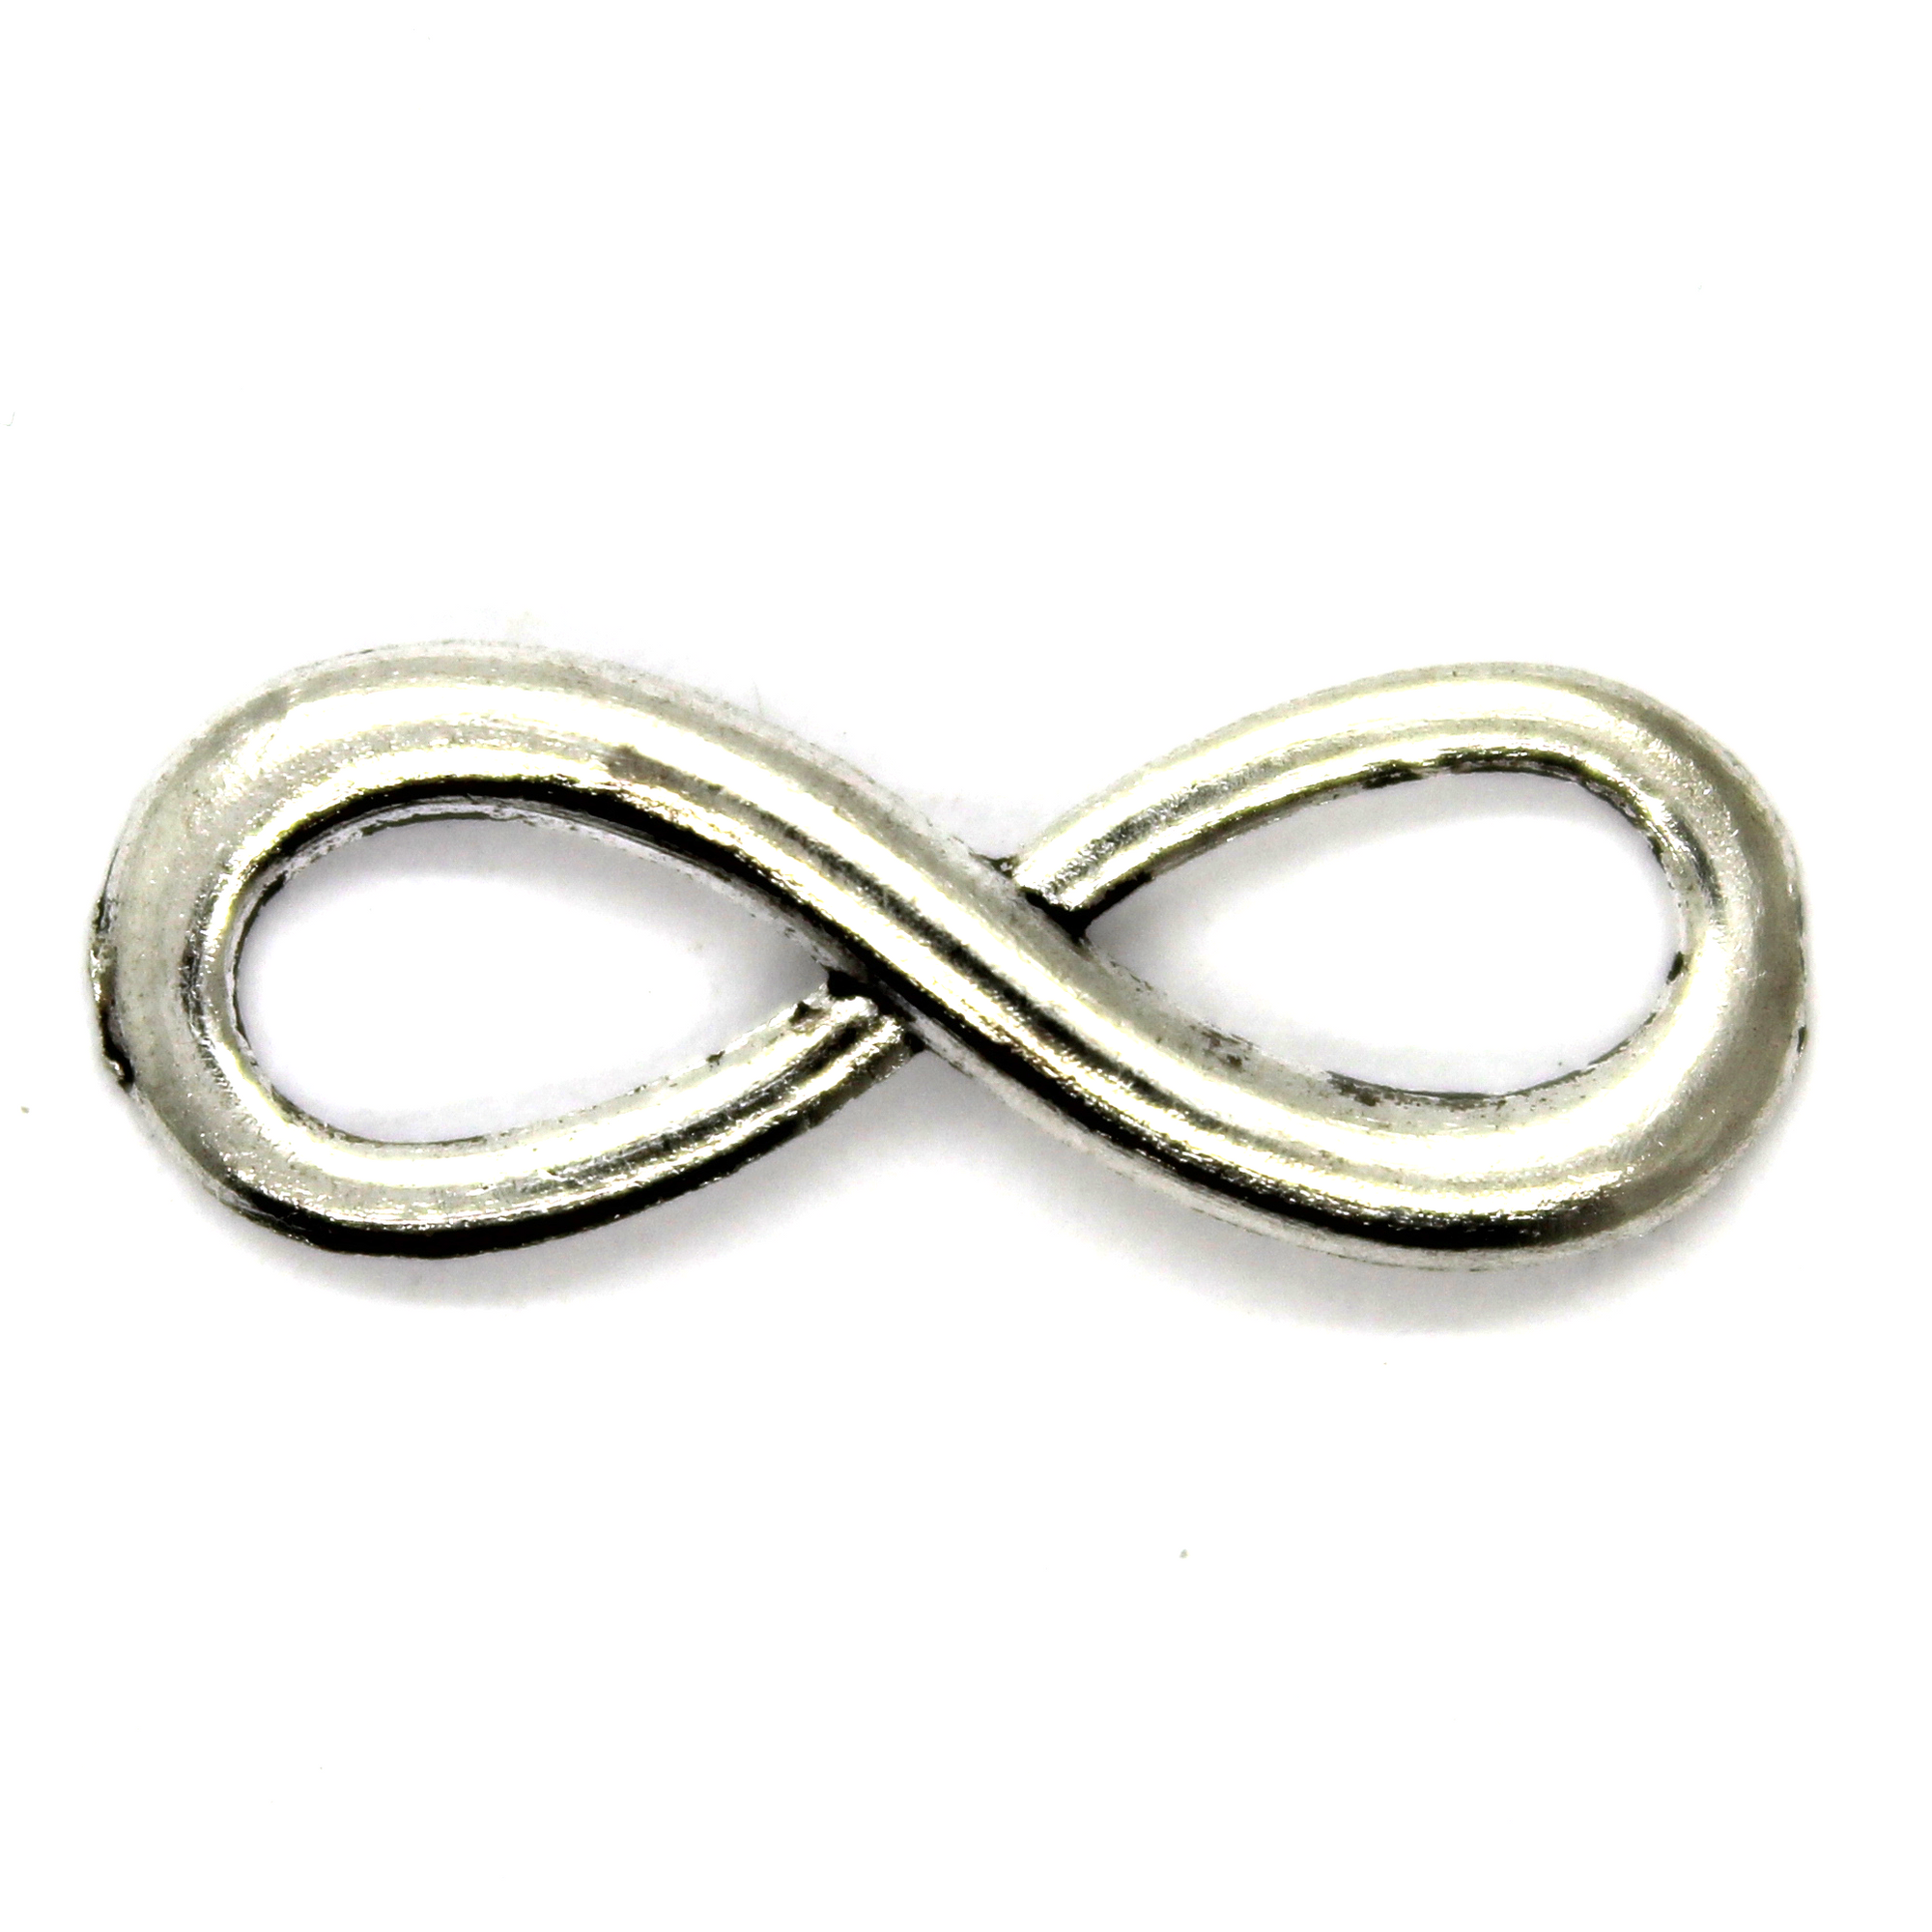 Connector, Curved Infinity, Silver, Alloy, 23mm x 8mm, Sold Per pkg of 6